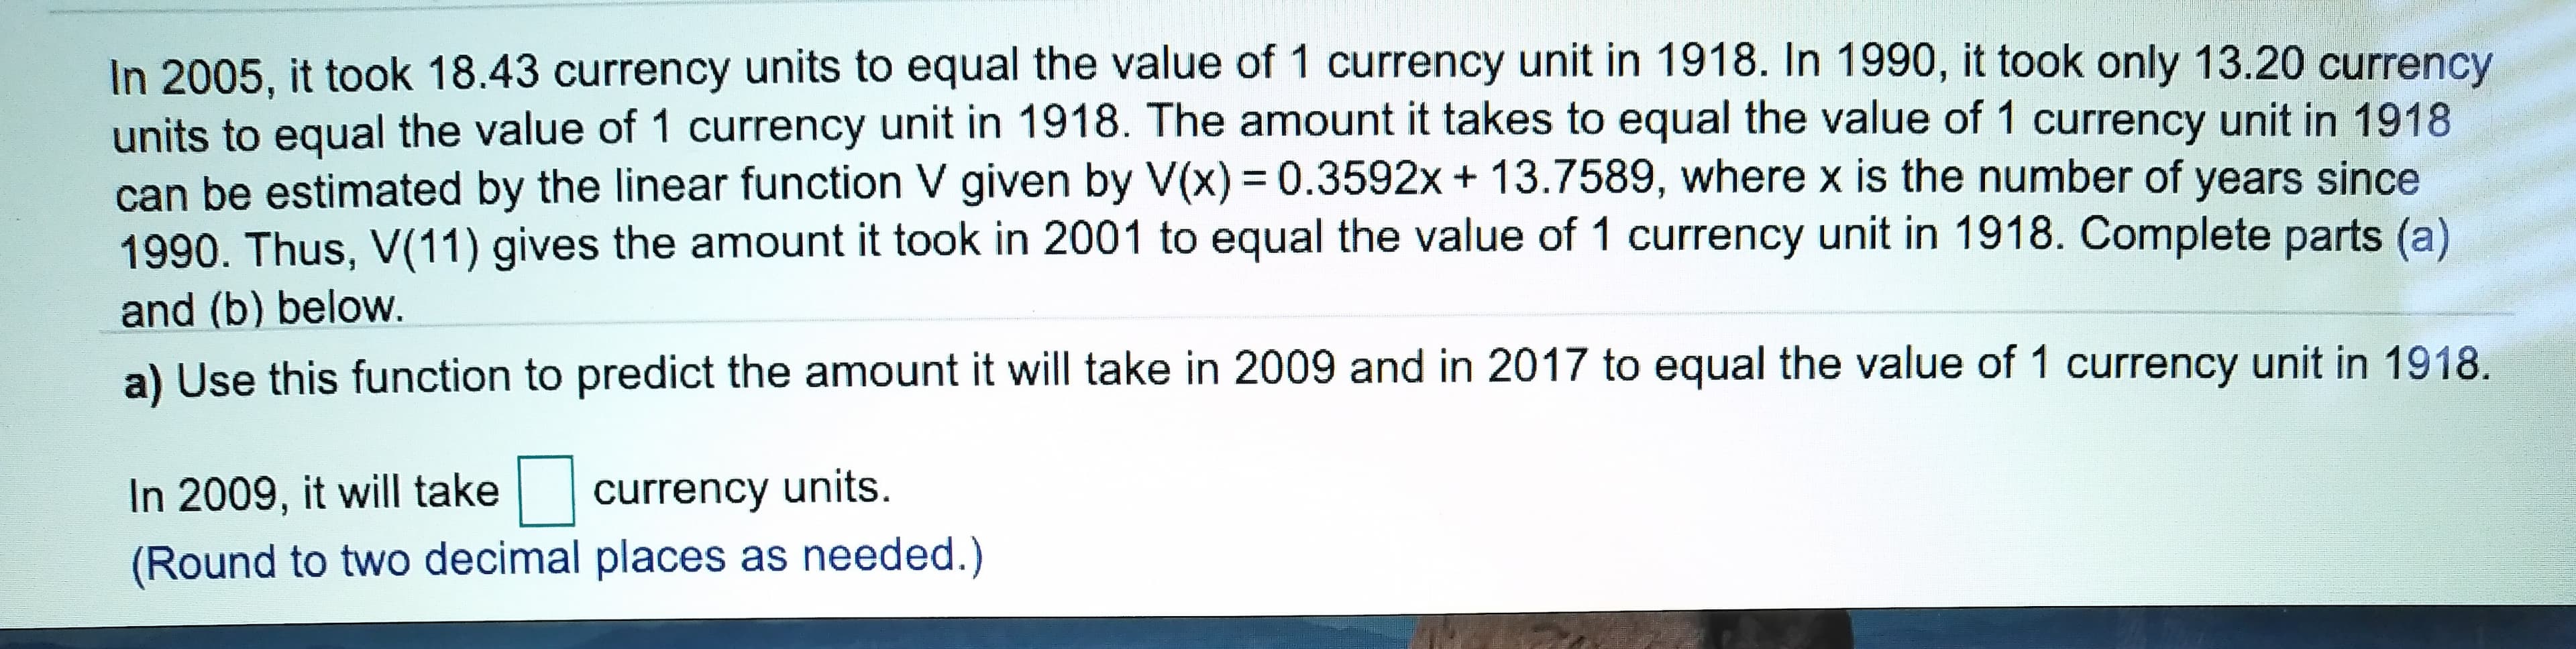 In 2005, it took 18.43 currency units to equal the value of 1 currency unit in 1918. In 1990, it took only 13.20 currency
units to equal the value of 1 currency unit in 1918. The amount it takes to equal the value of 1 currency unit in 1918
can be estimated by the linear function V given by V(x) 0.3592x + 13.7589, where x is the number of years since
1990. Thus, V(11) gives the amount it took in 2001 to equal the value of 1 currency unit in 1918. Complete parts (a)
and (b) below.
a) Use this function to predict the amount it will take in 2009 and in 2017 to equal the value of 1 currency unit in 1918
currency units
In 2009, it will take
(Round to two decimal places as needed.)
